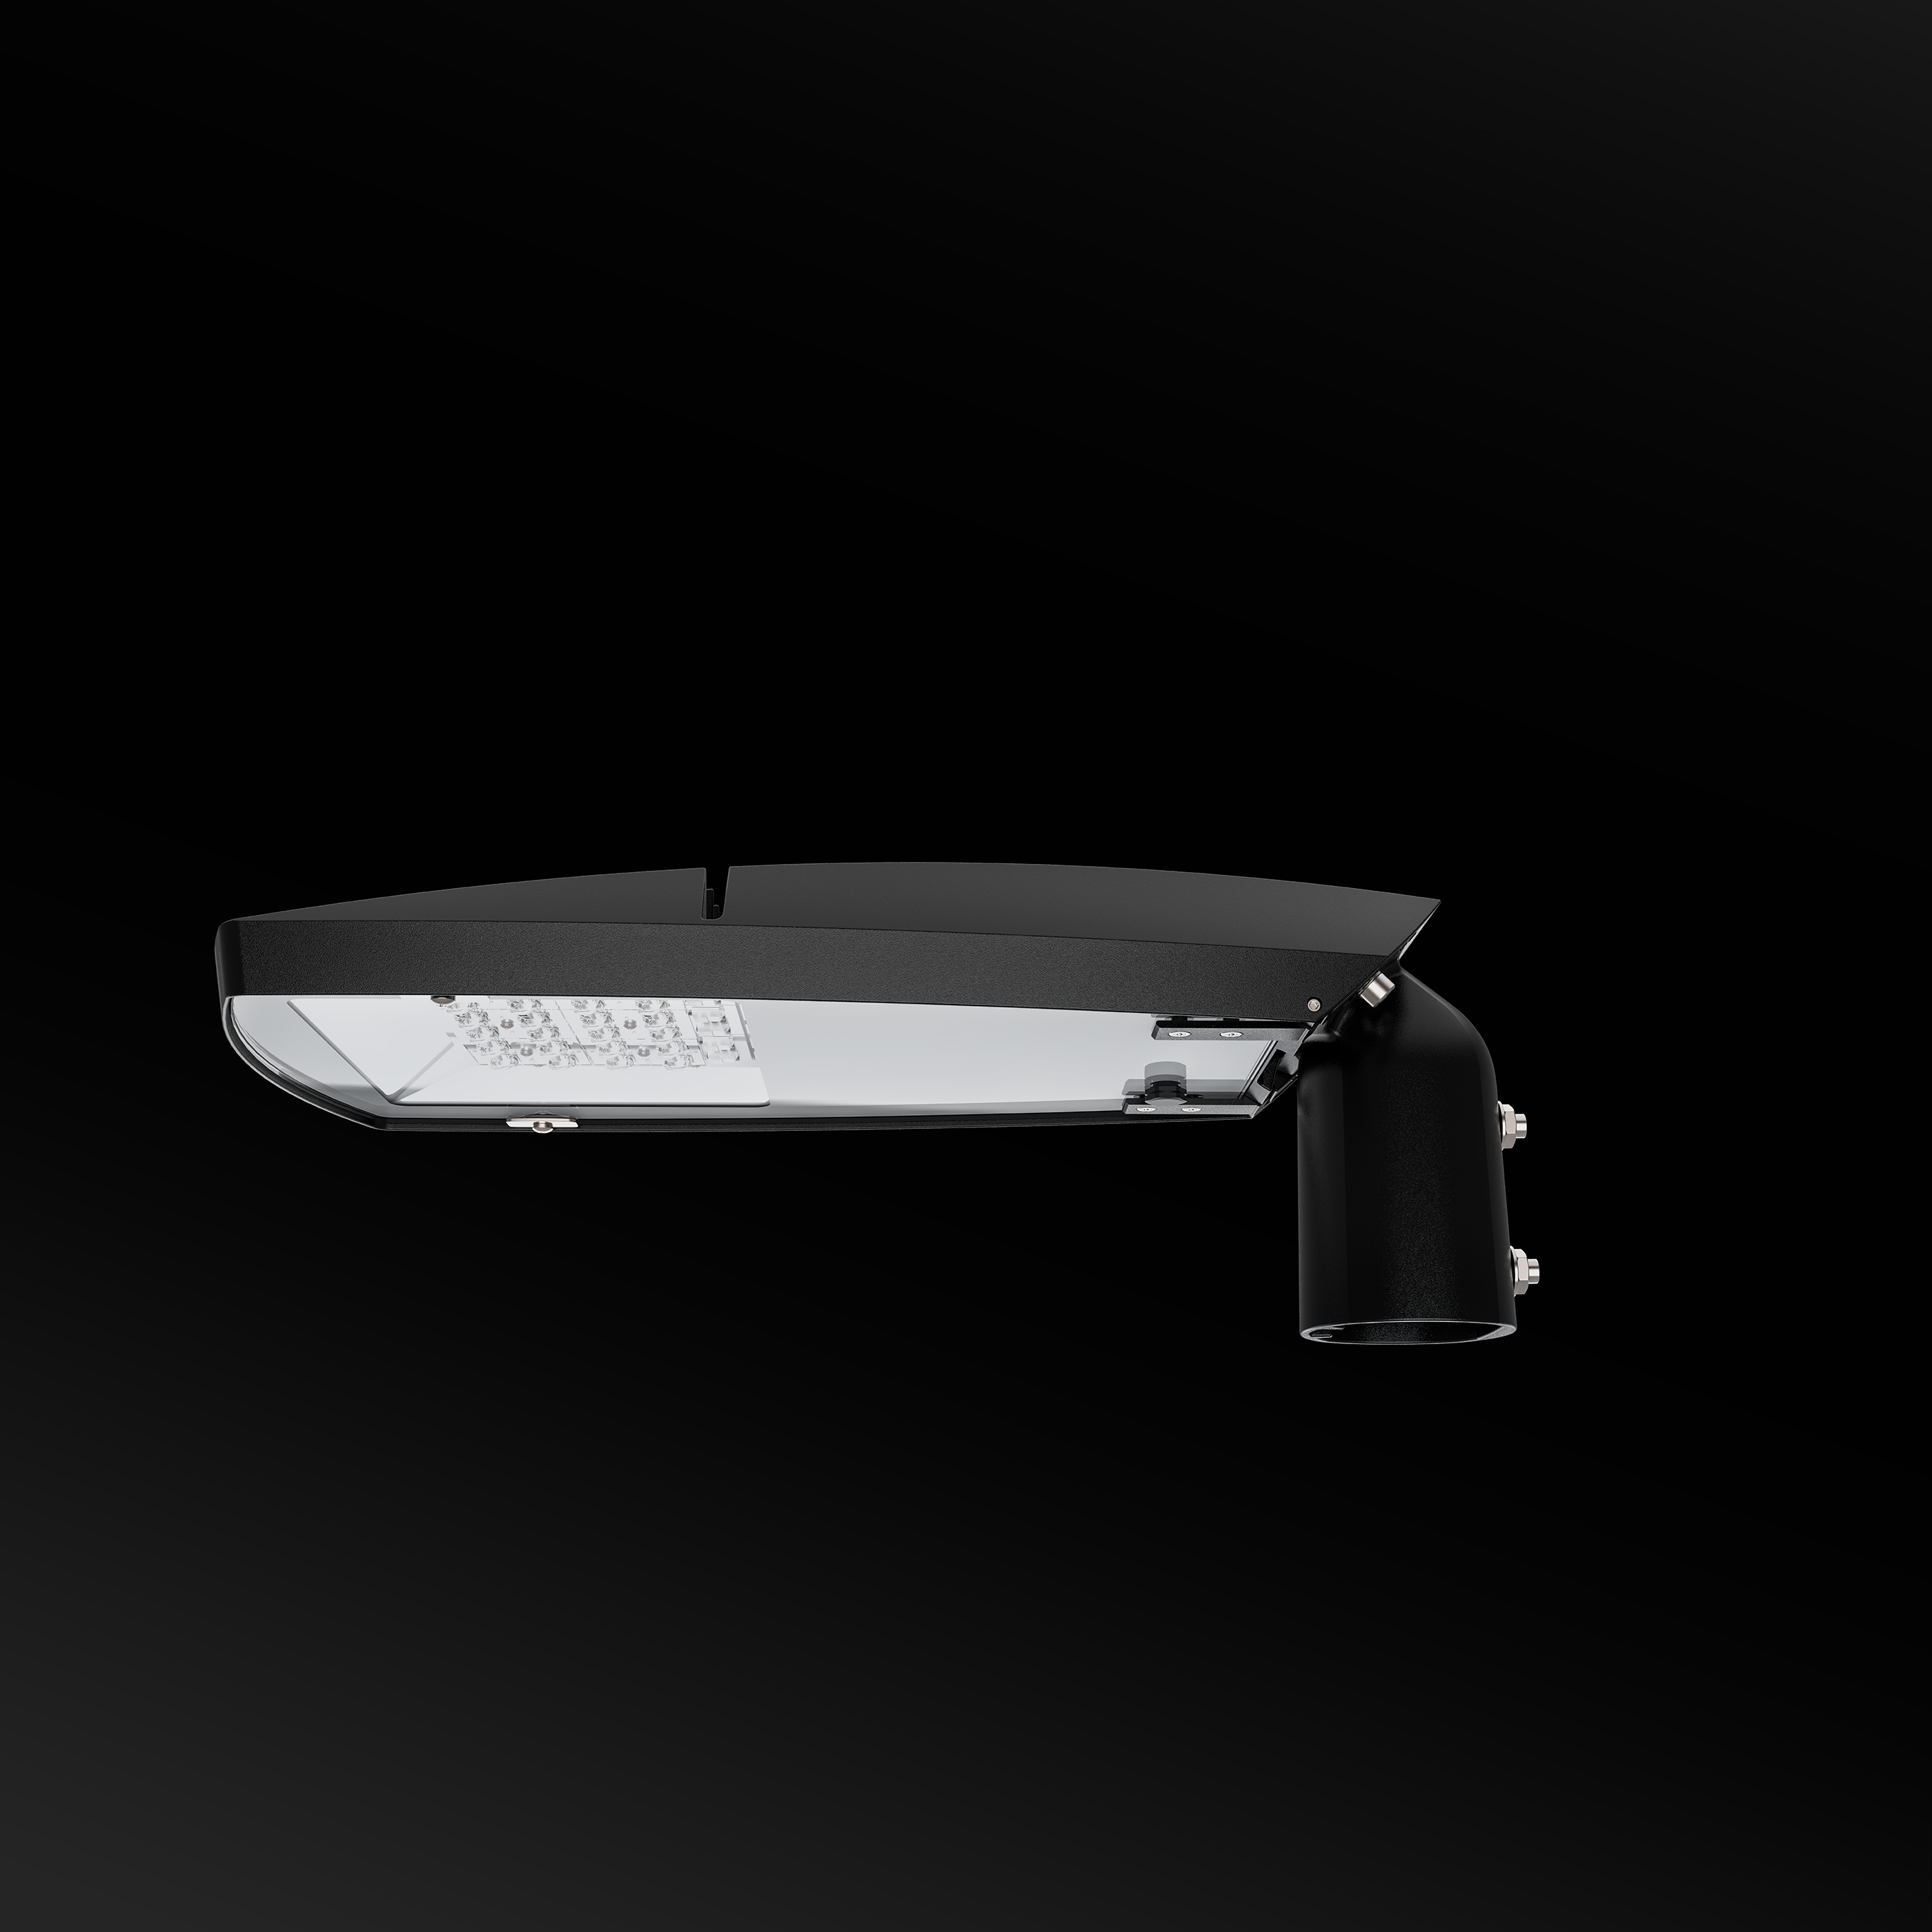 The Nox S's clean lines and subtle profile result in an elegant, modern luminaire.